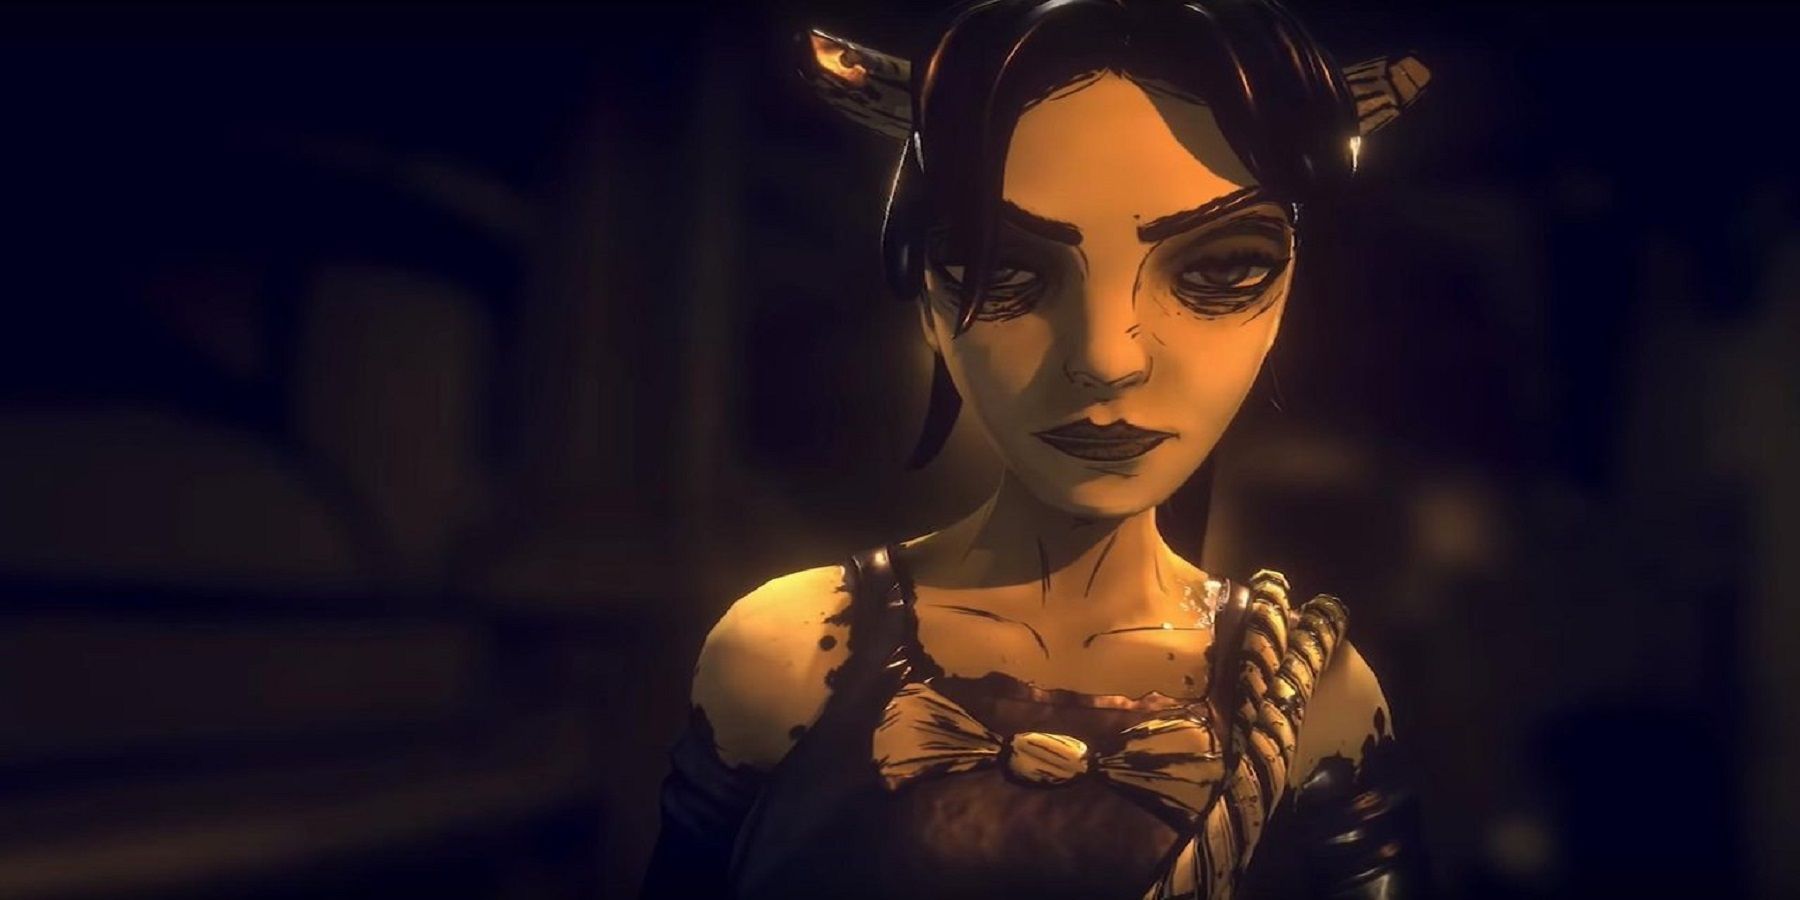 Allison in Bendy and the Dark Revival